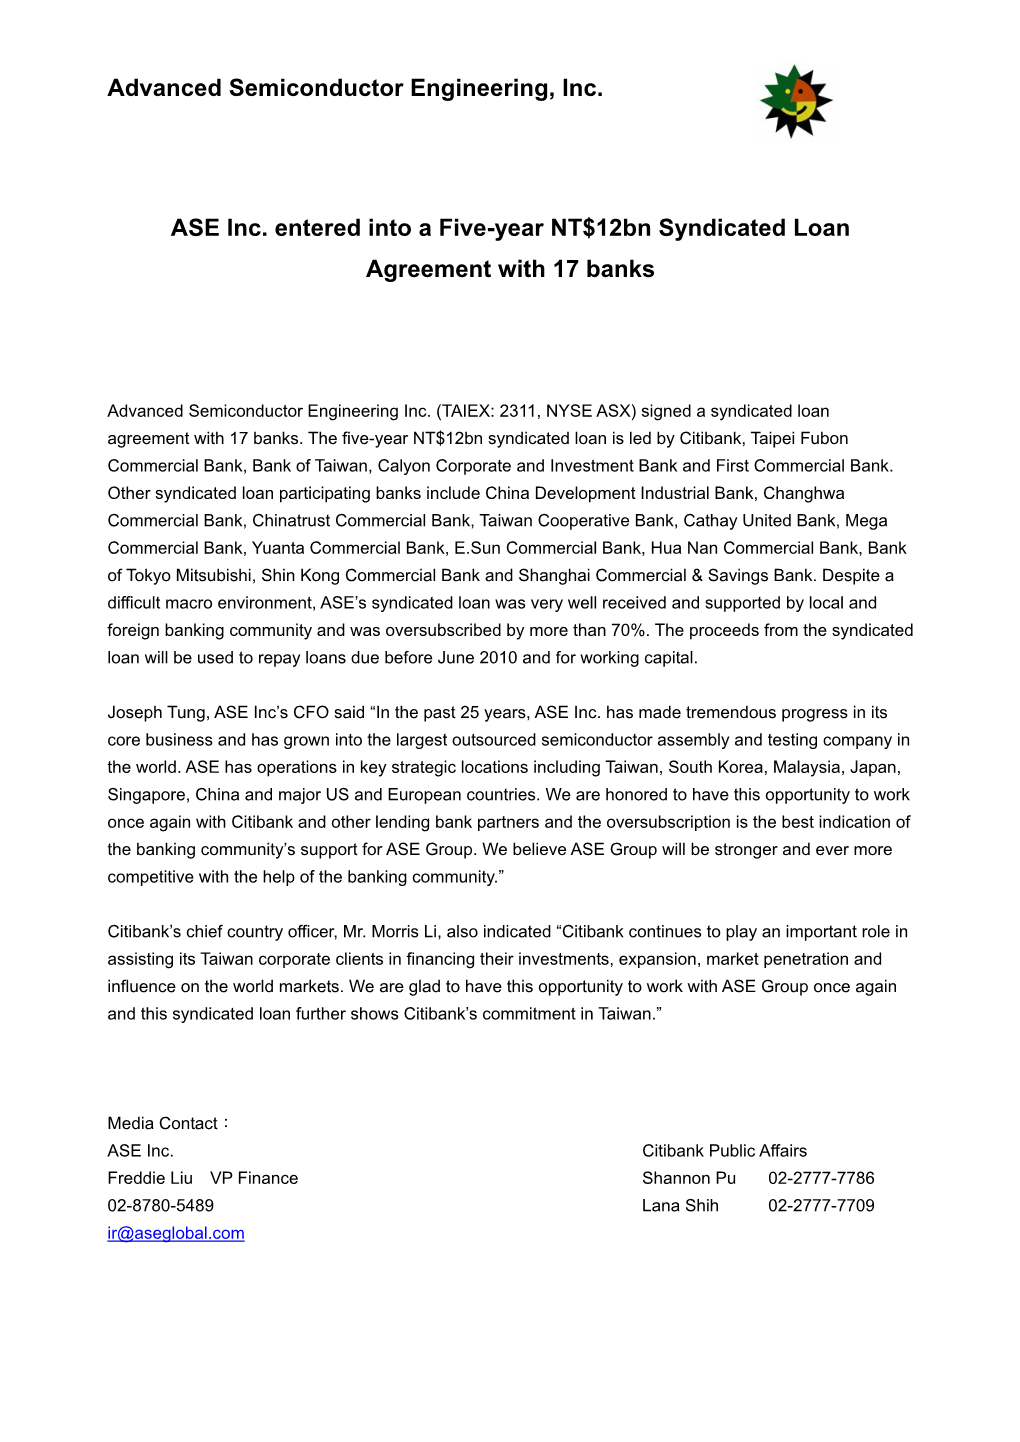 ASE Inc. Entered Into a Five-Year NT$12Bn Syndicated Loan Agreement with 17 Banks